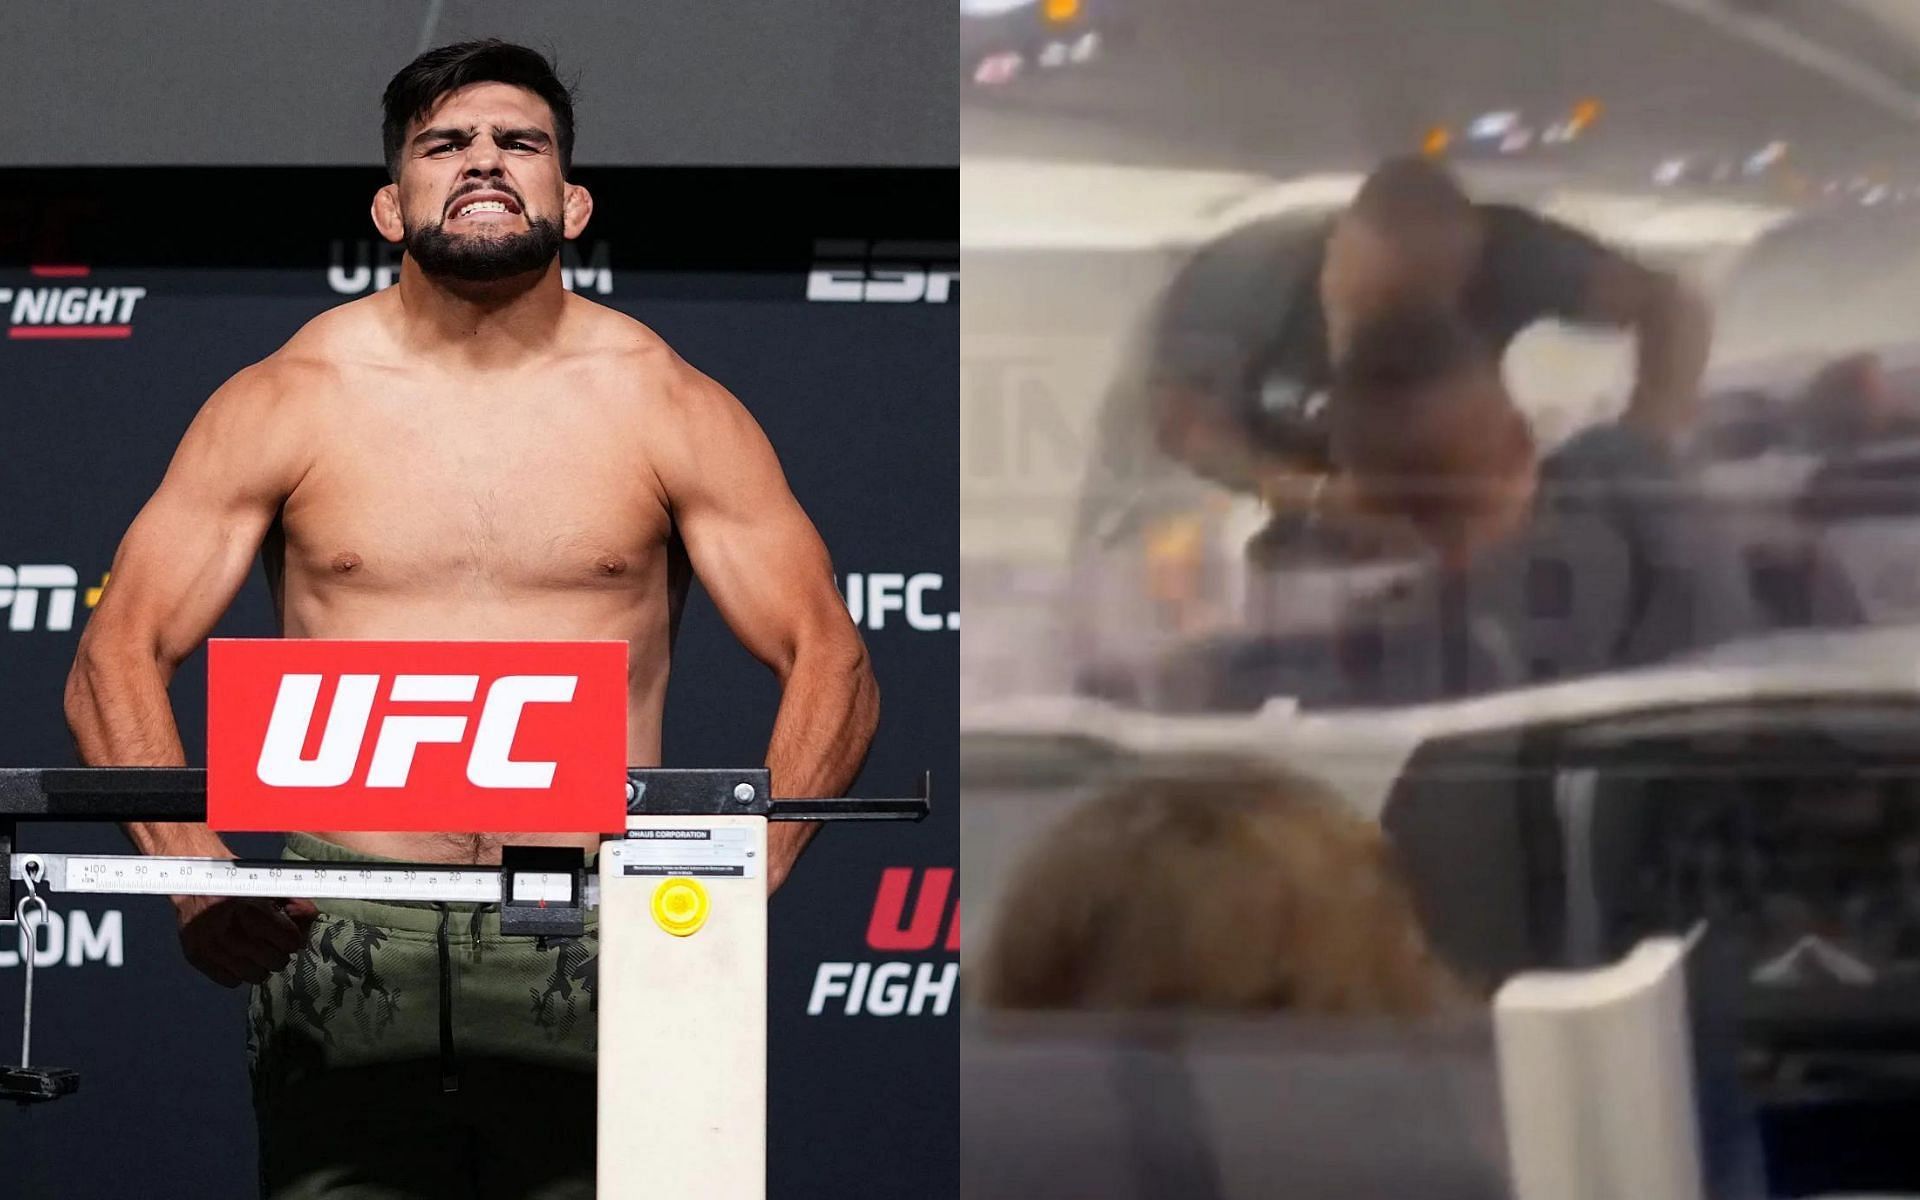 Kelvin Gastelum (left) urges fans not to act up following the Mike Tyson controversy (right) [Image via. NewYorkPost]